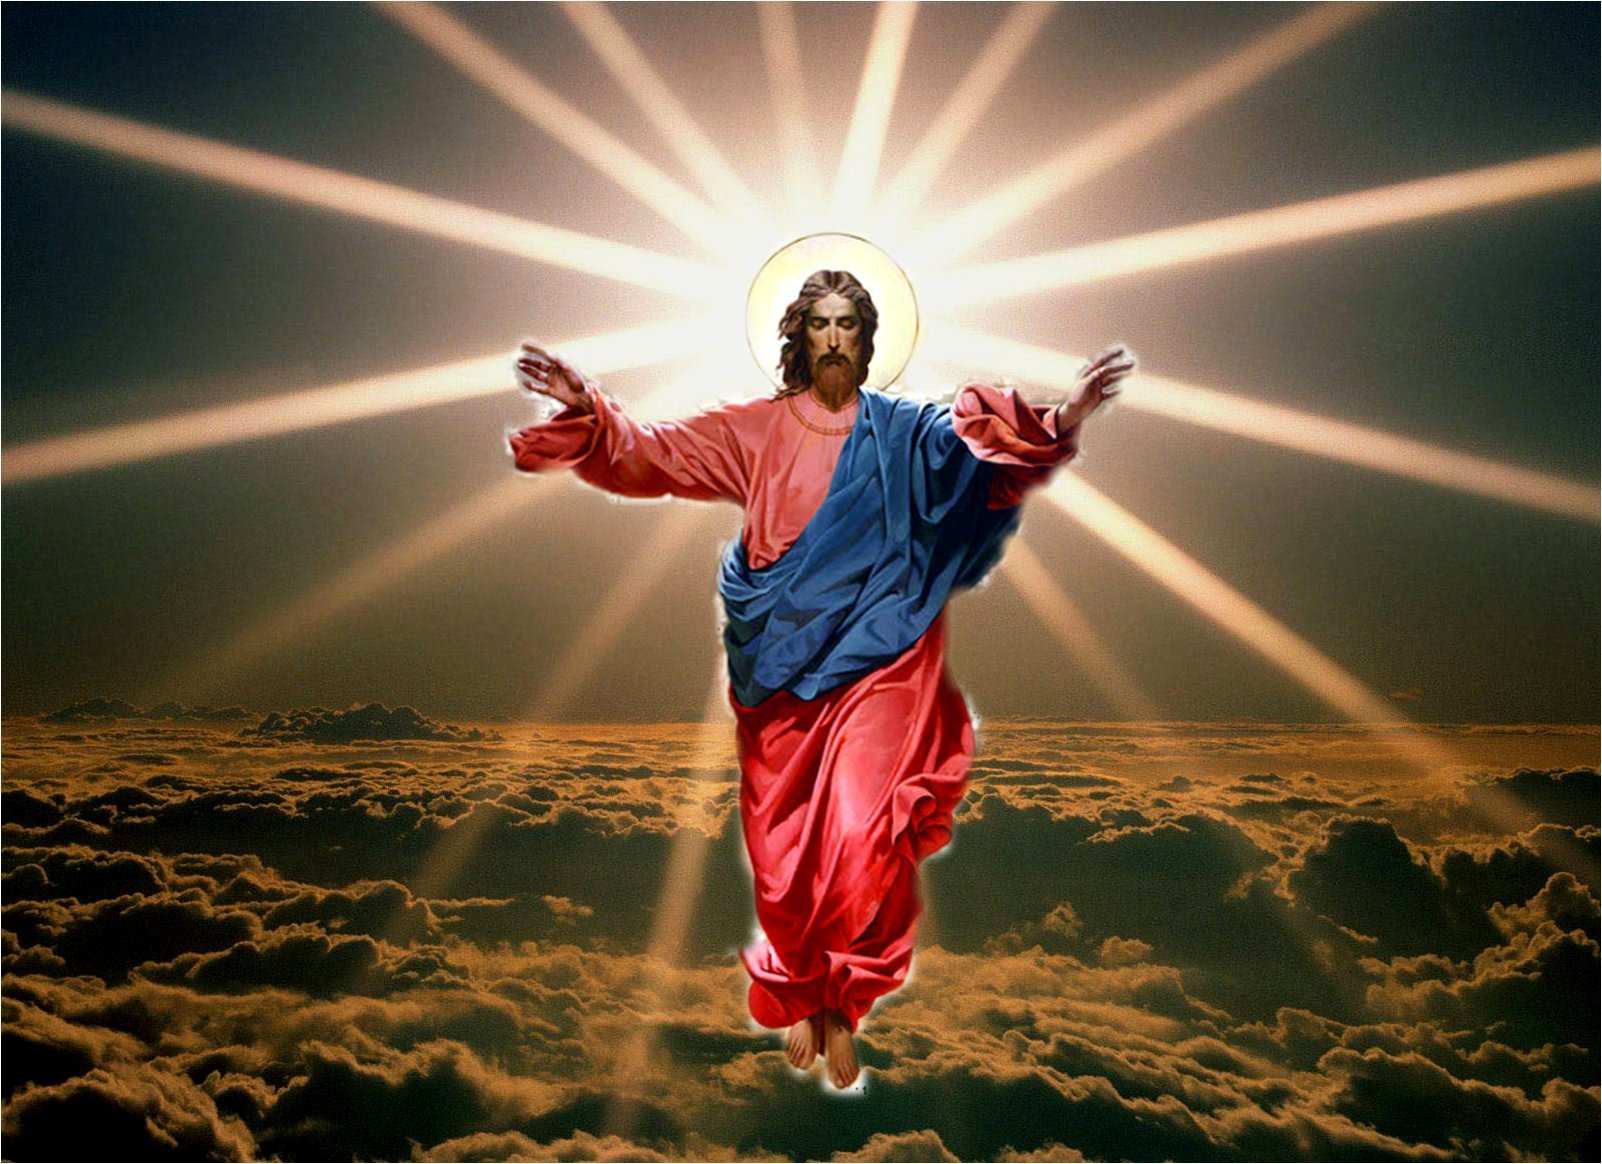 Image Of Christ Wallpapers High Quality | Download Free